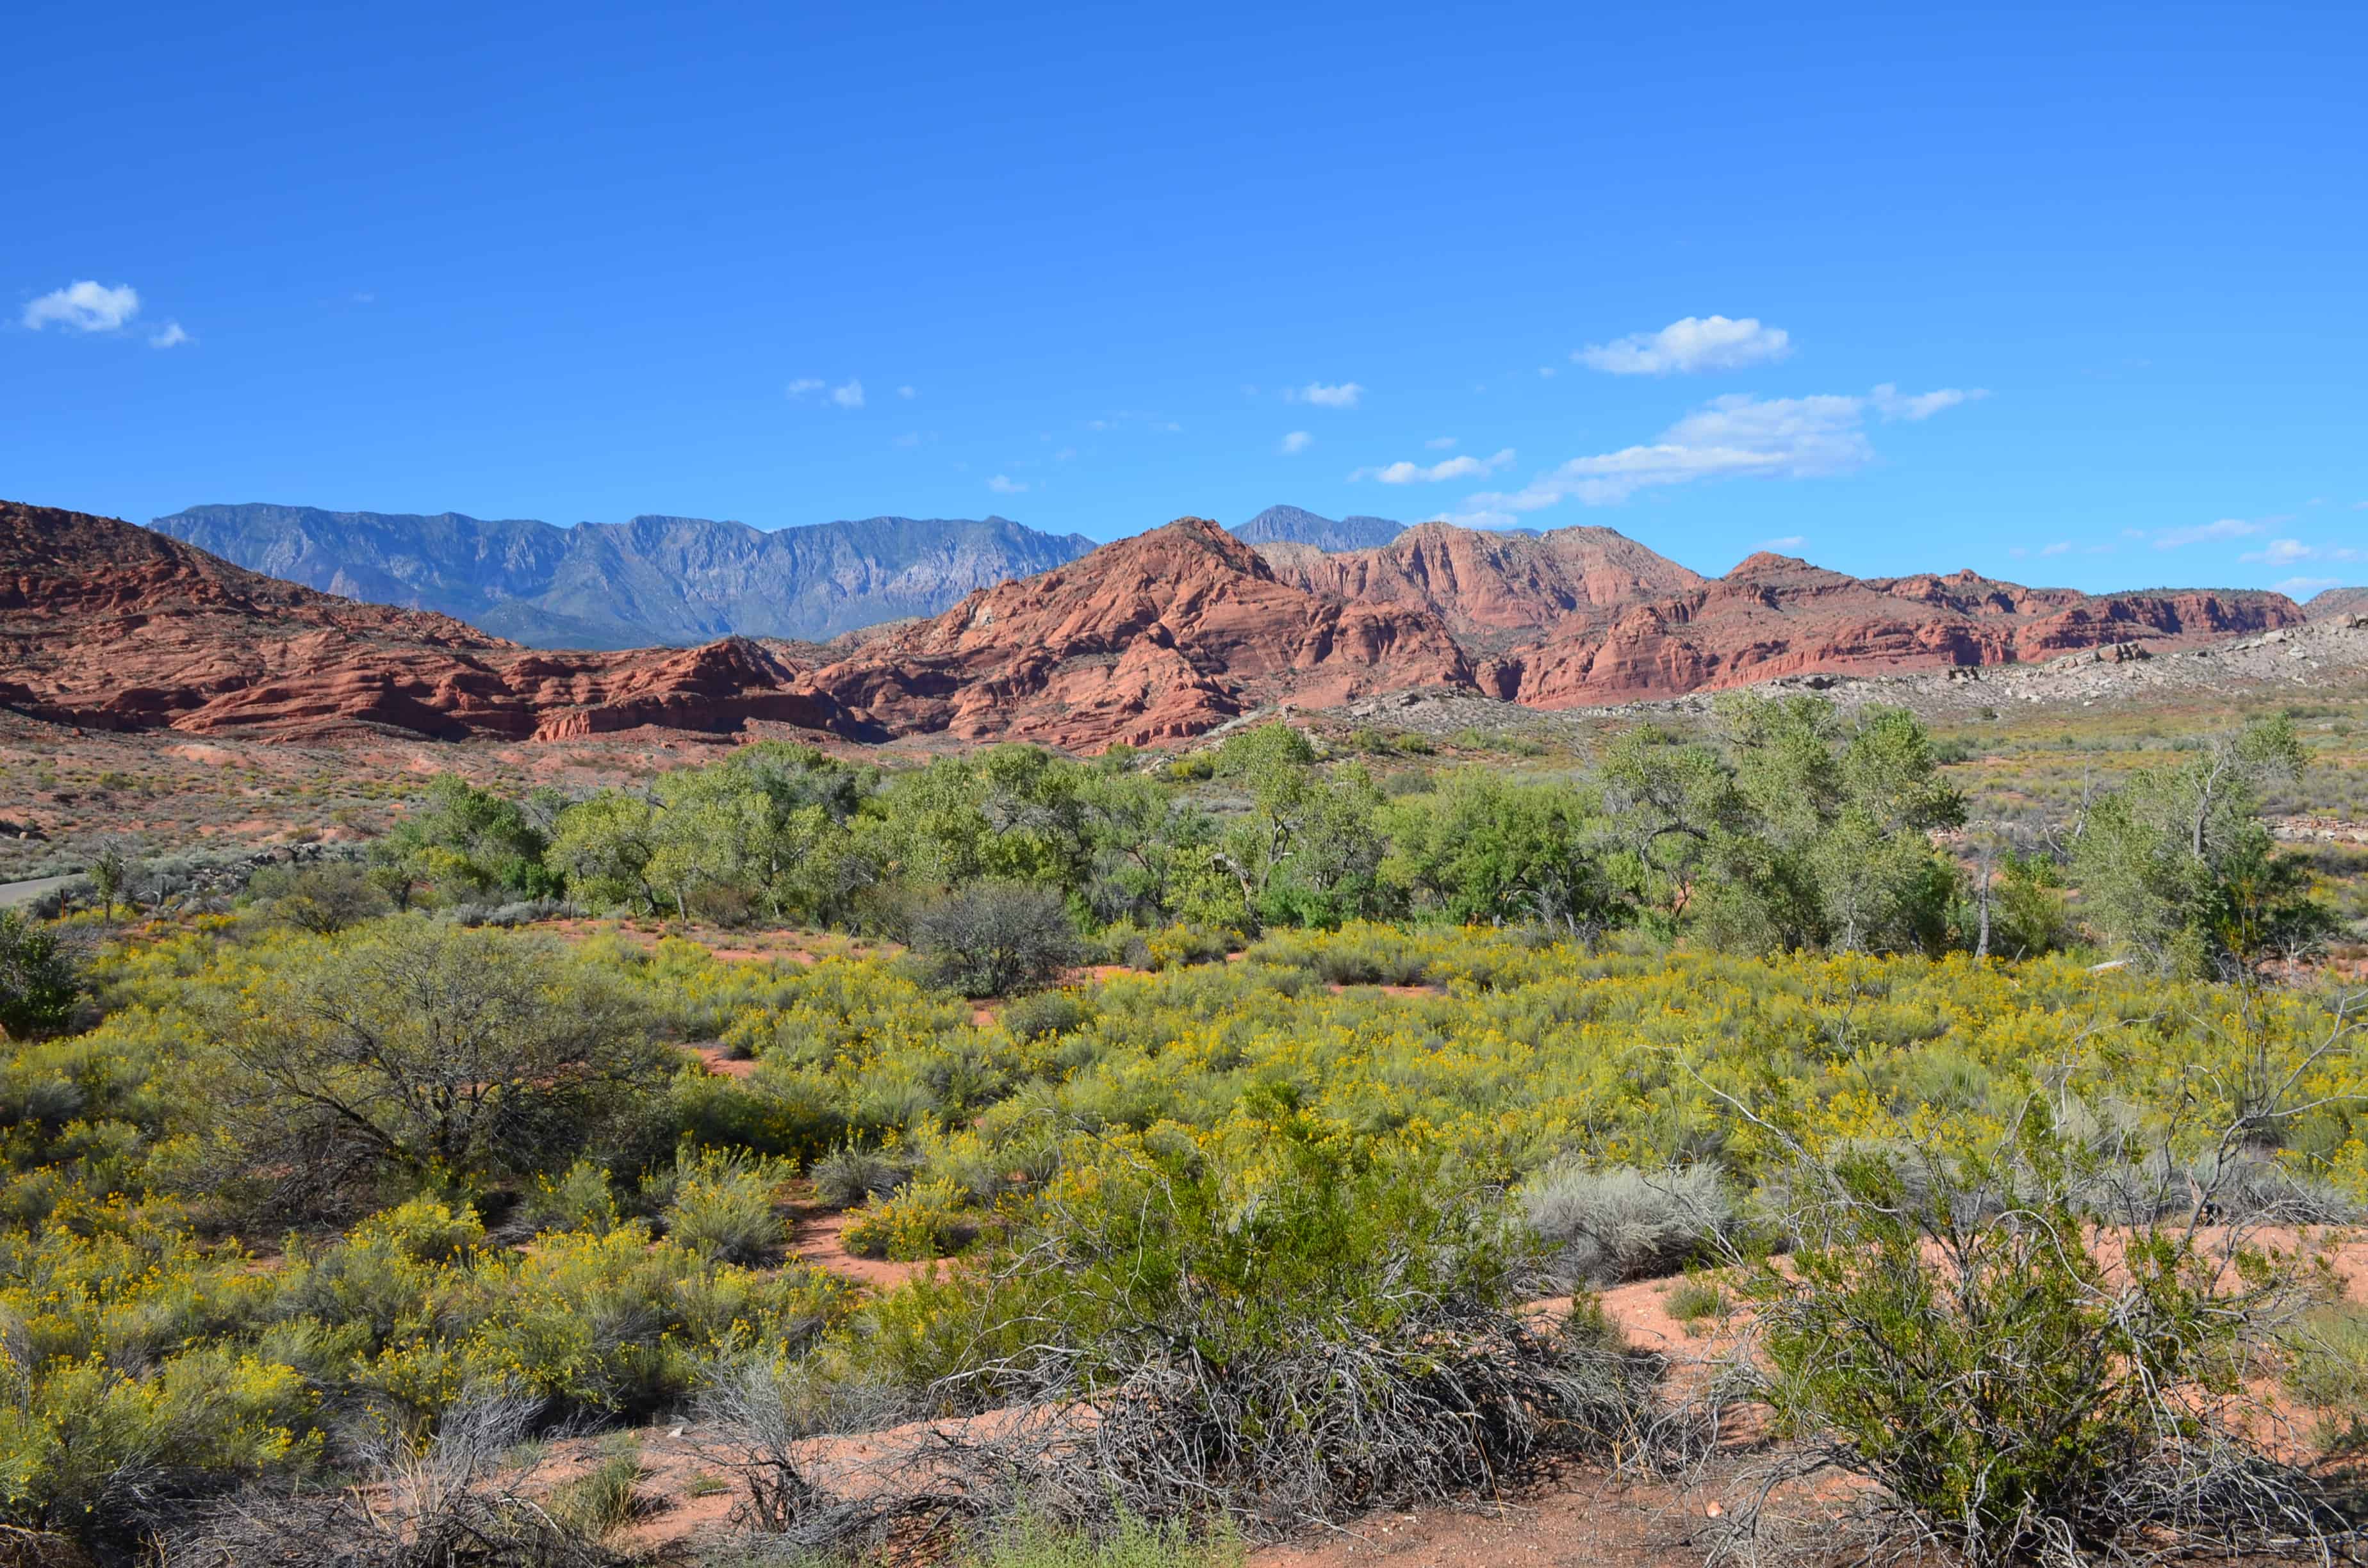 Scenery at the Orson Adams house at Red Cliffs Recreation Area in Utah